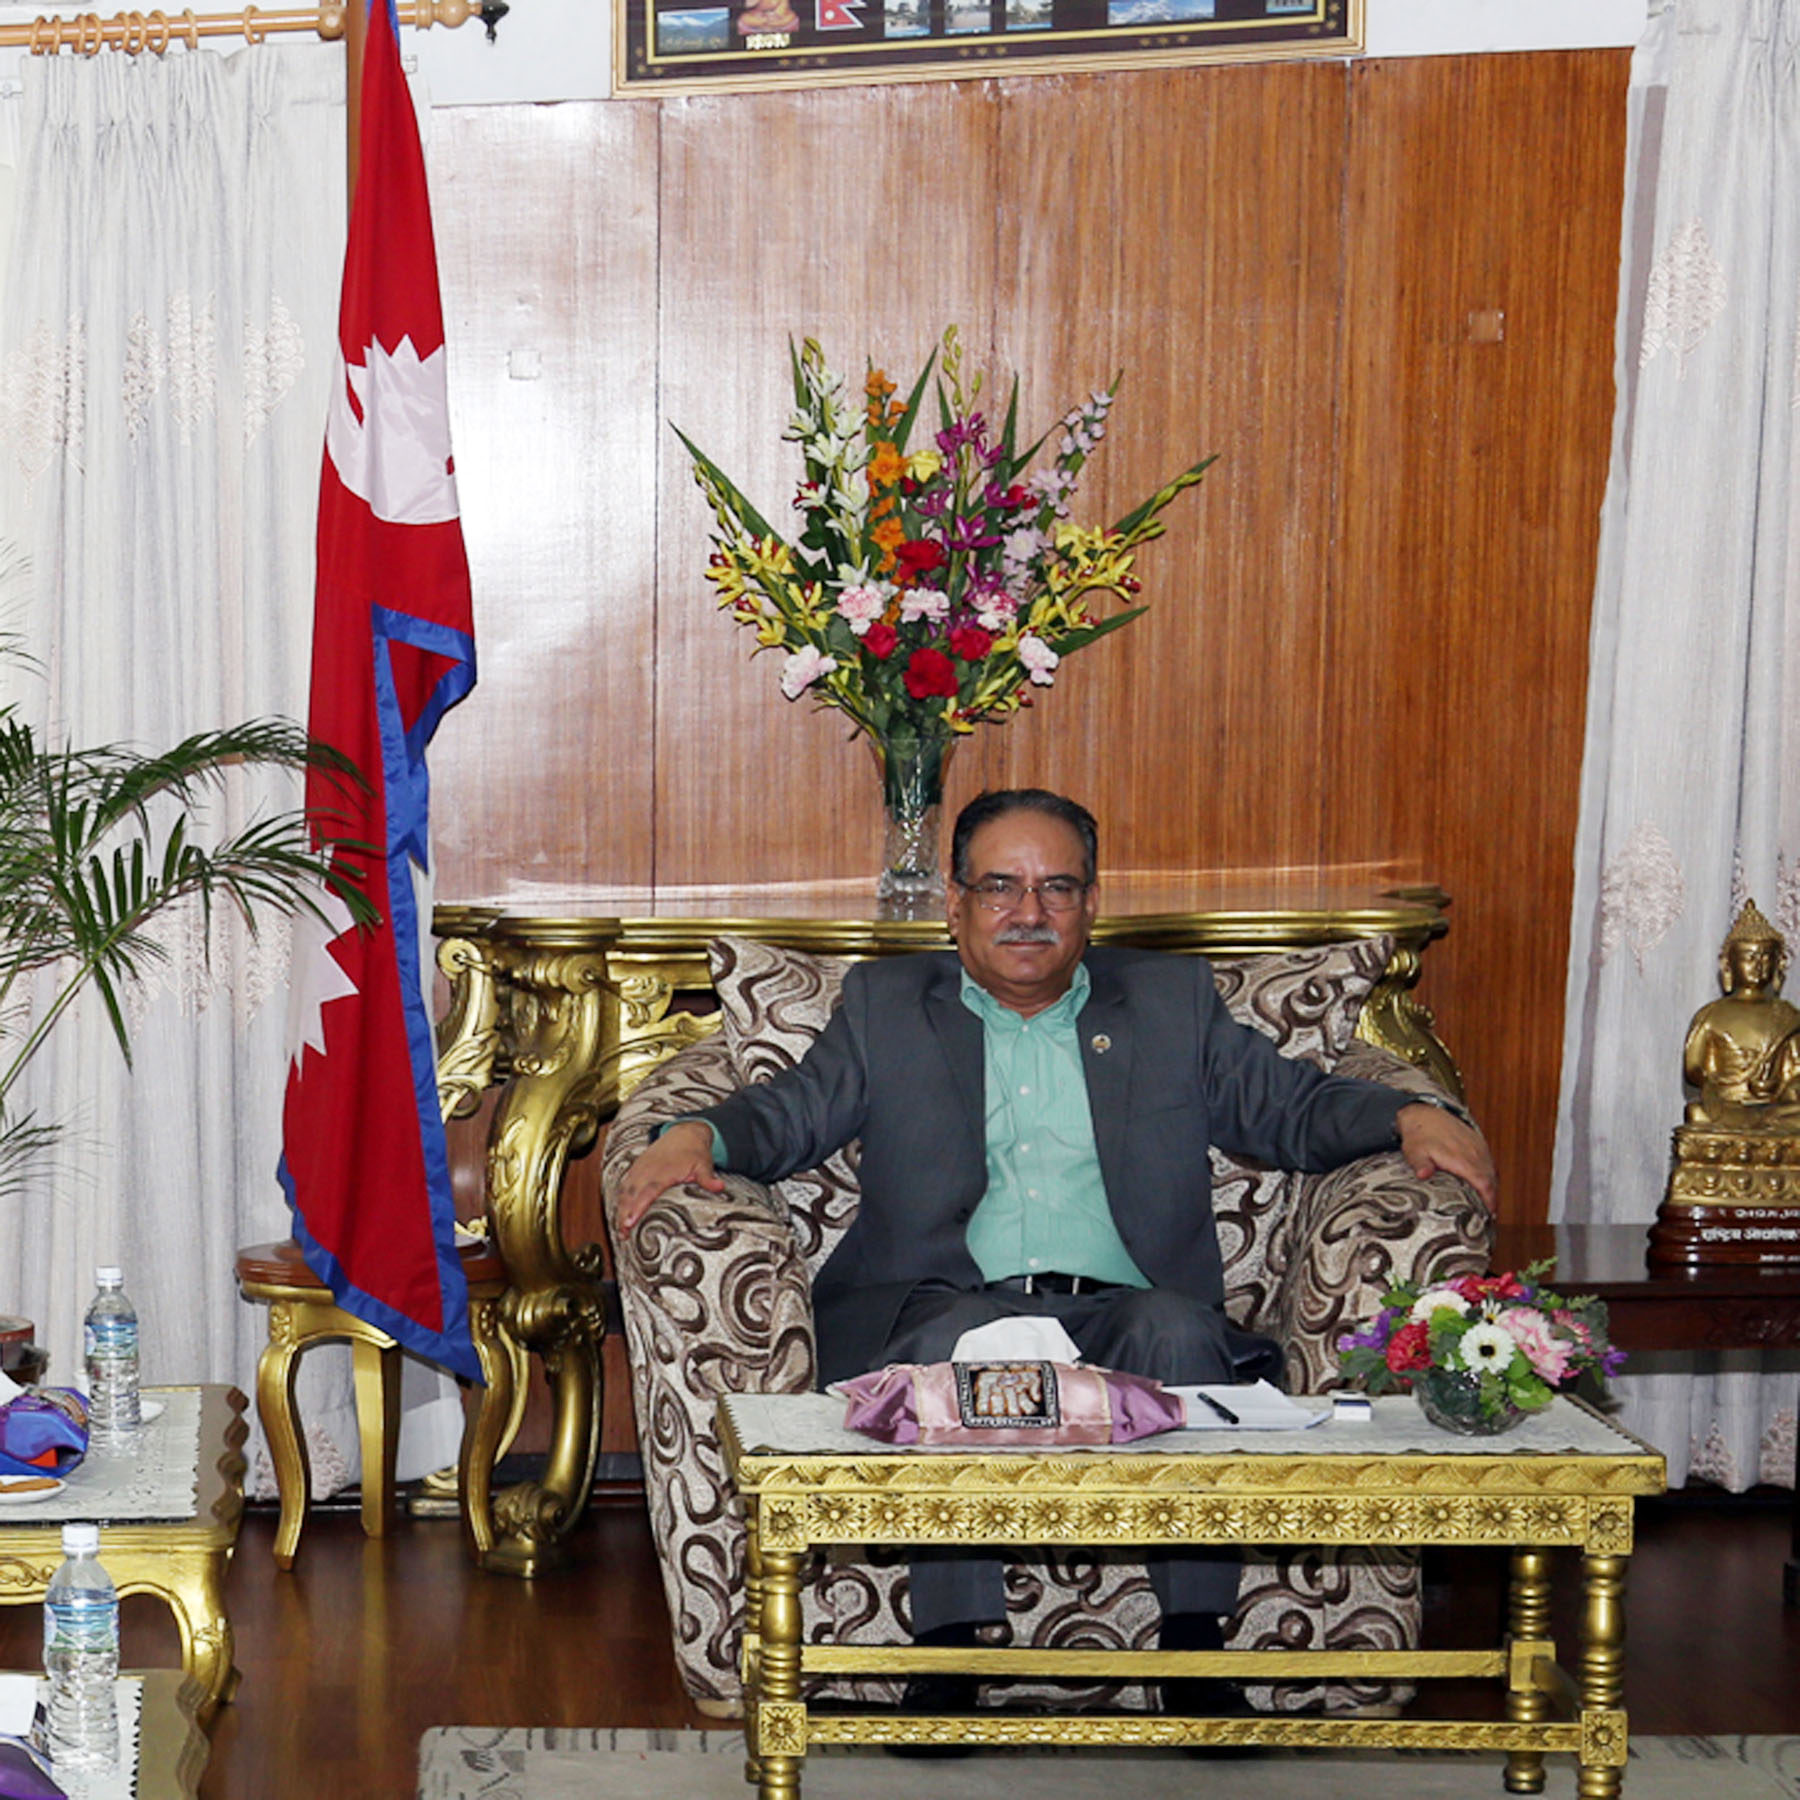 Prime Minister Pushpa Kamal Dahal attends the meeting of three major political parties CPN Maoist Centre and Nepali Congress; and the main opposition CPN-UML held at the Prime Minister's official residence in Baluwatar, on Tuesday, August 30, 2016. Photo: RSS